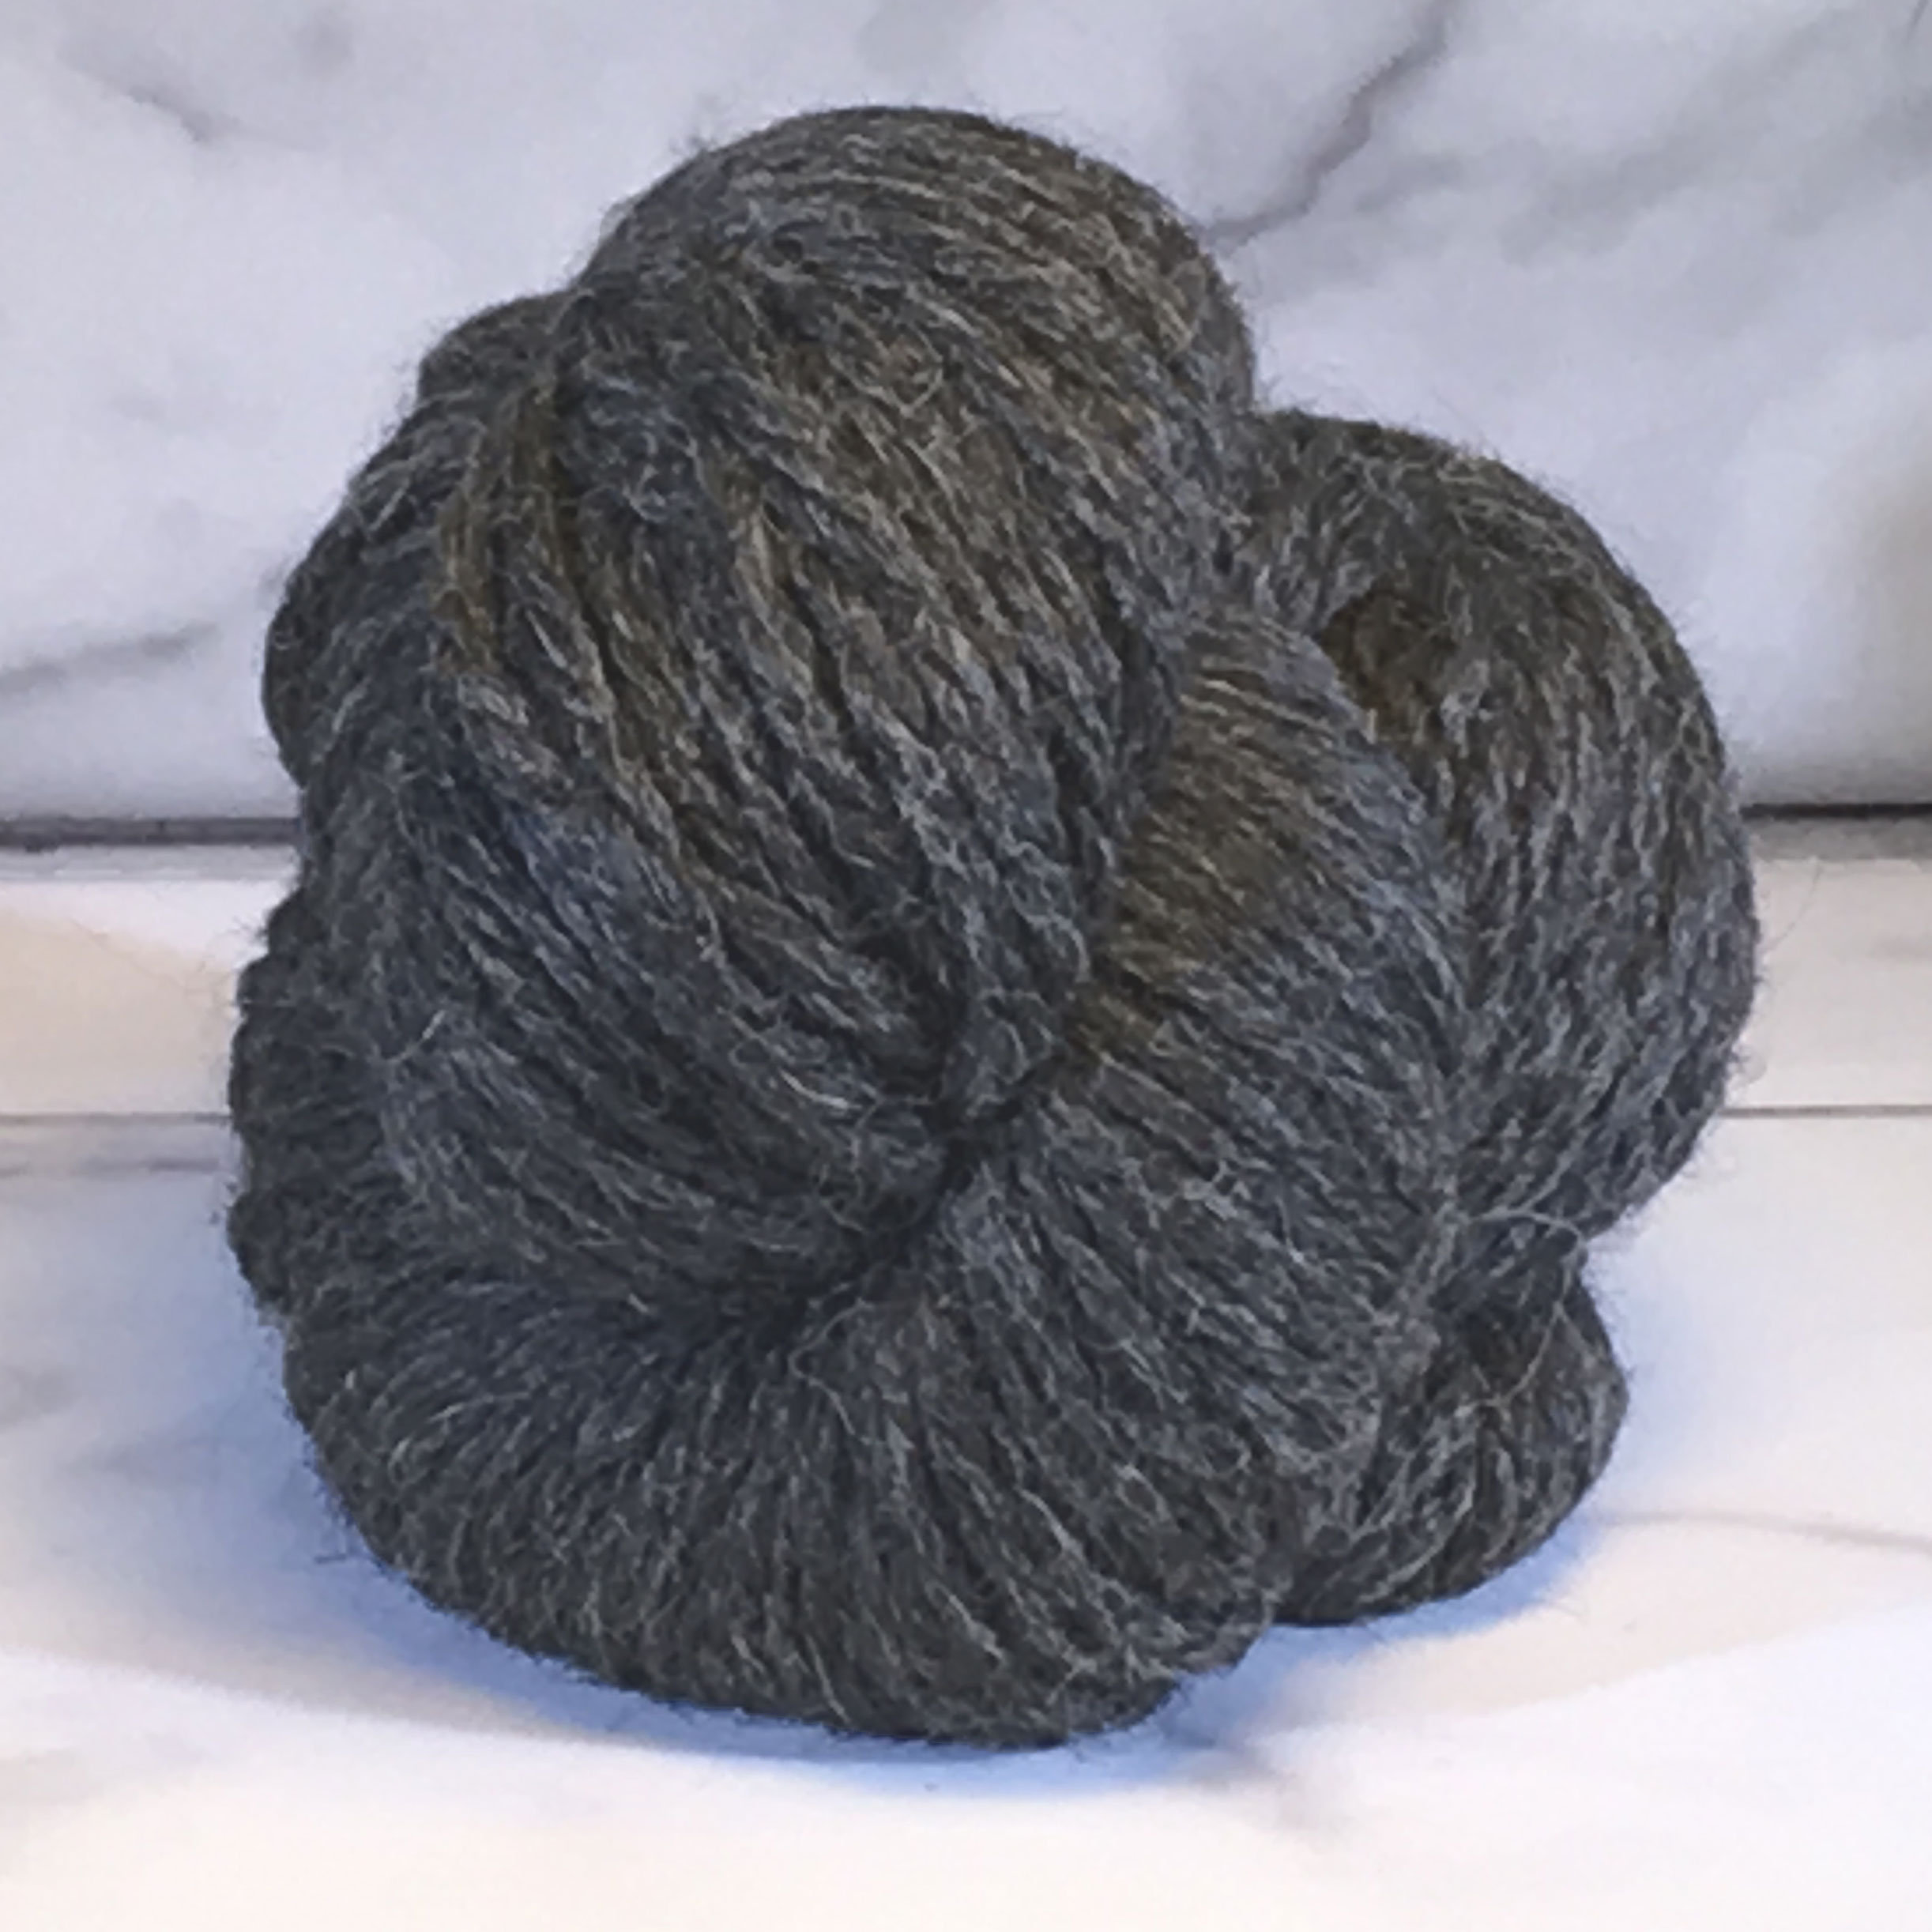 Juniper Moon Farm Herriot Great<br><strong>Charcoal Gray</strong><br>.